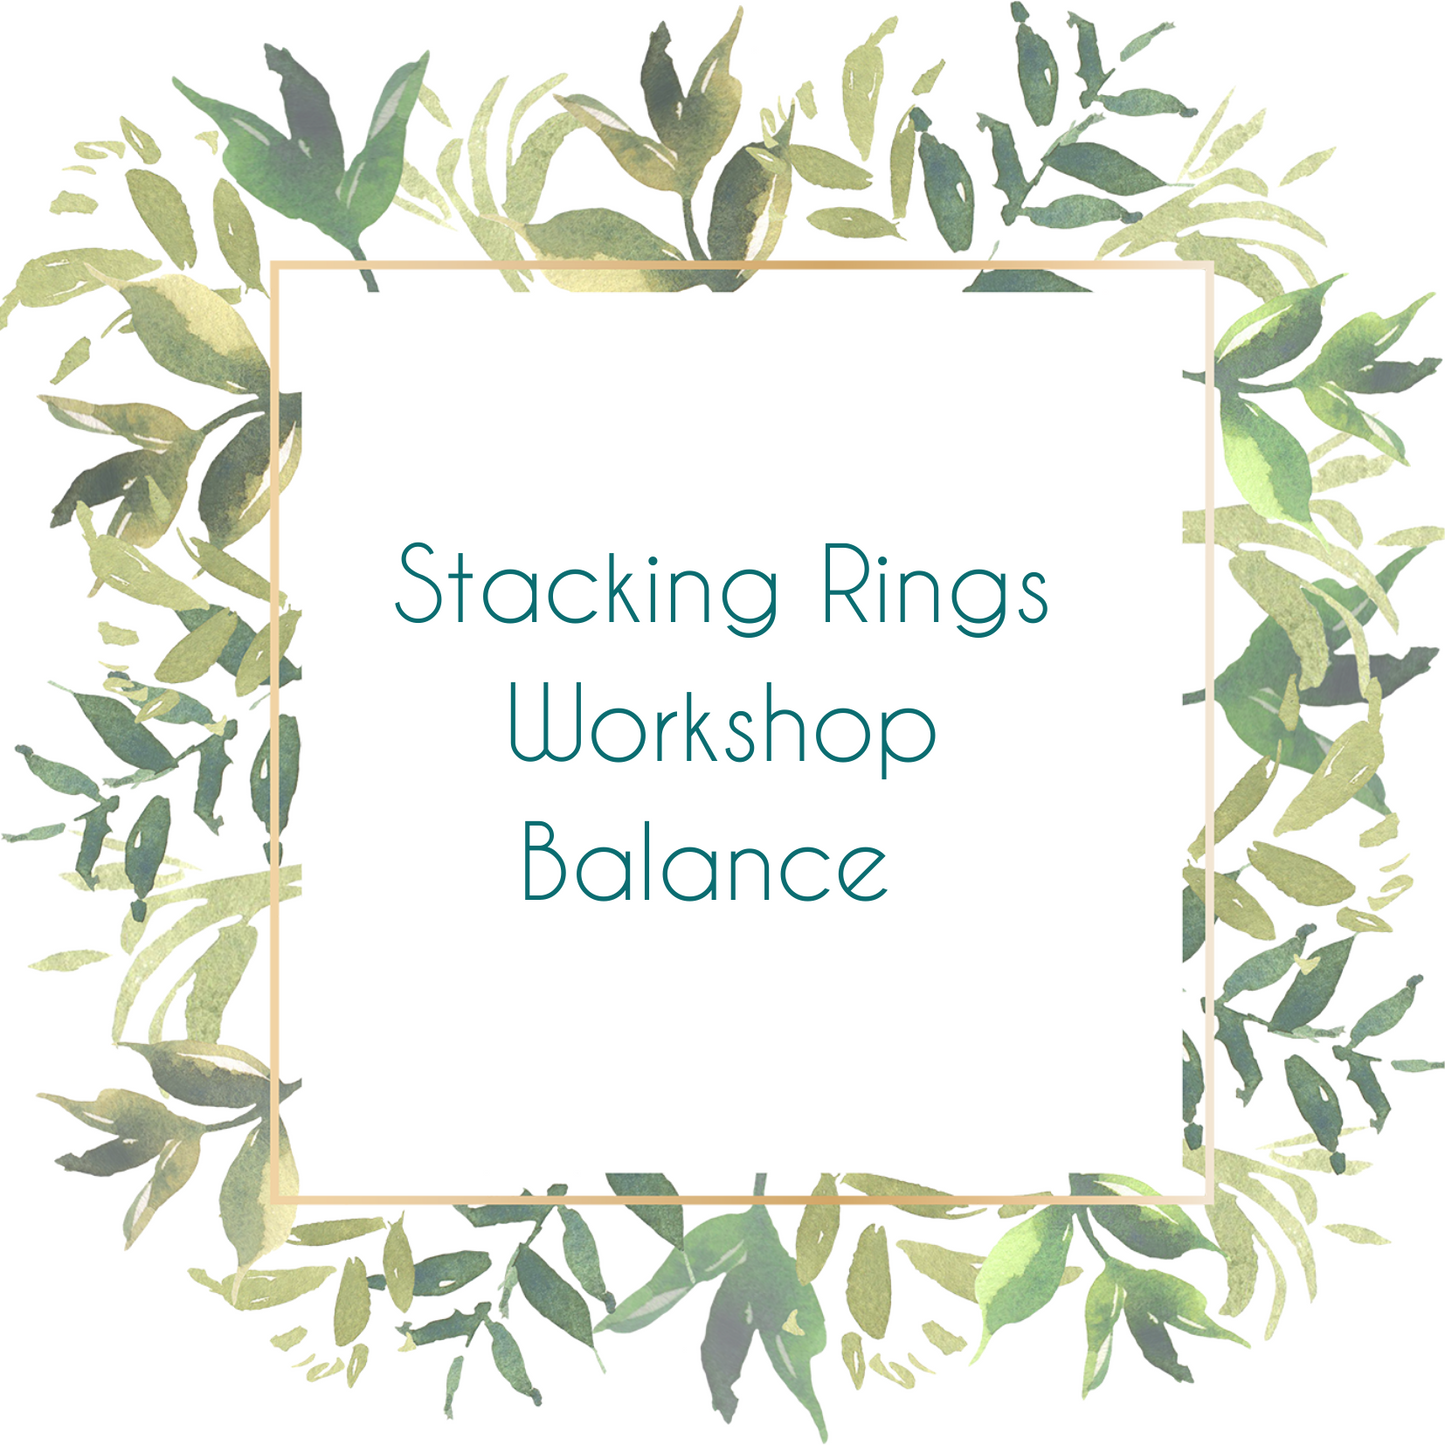 Stacking Rings in a Day Workshop